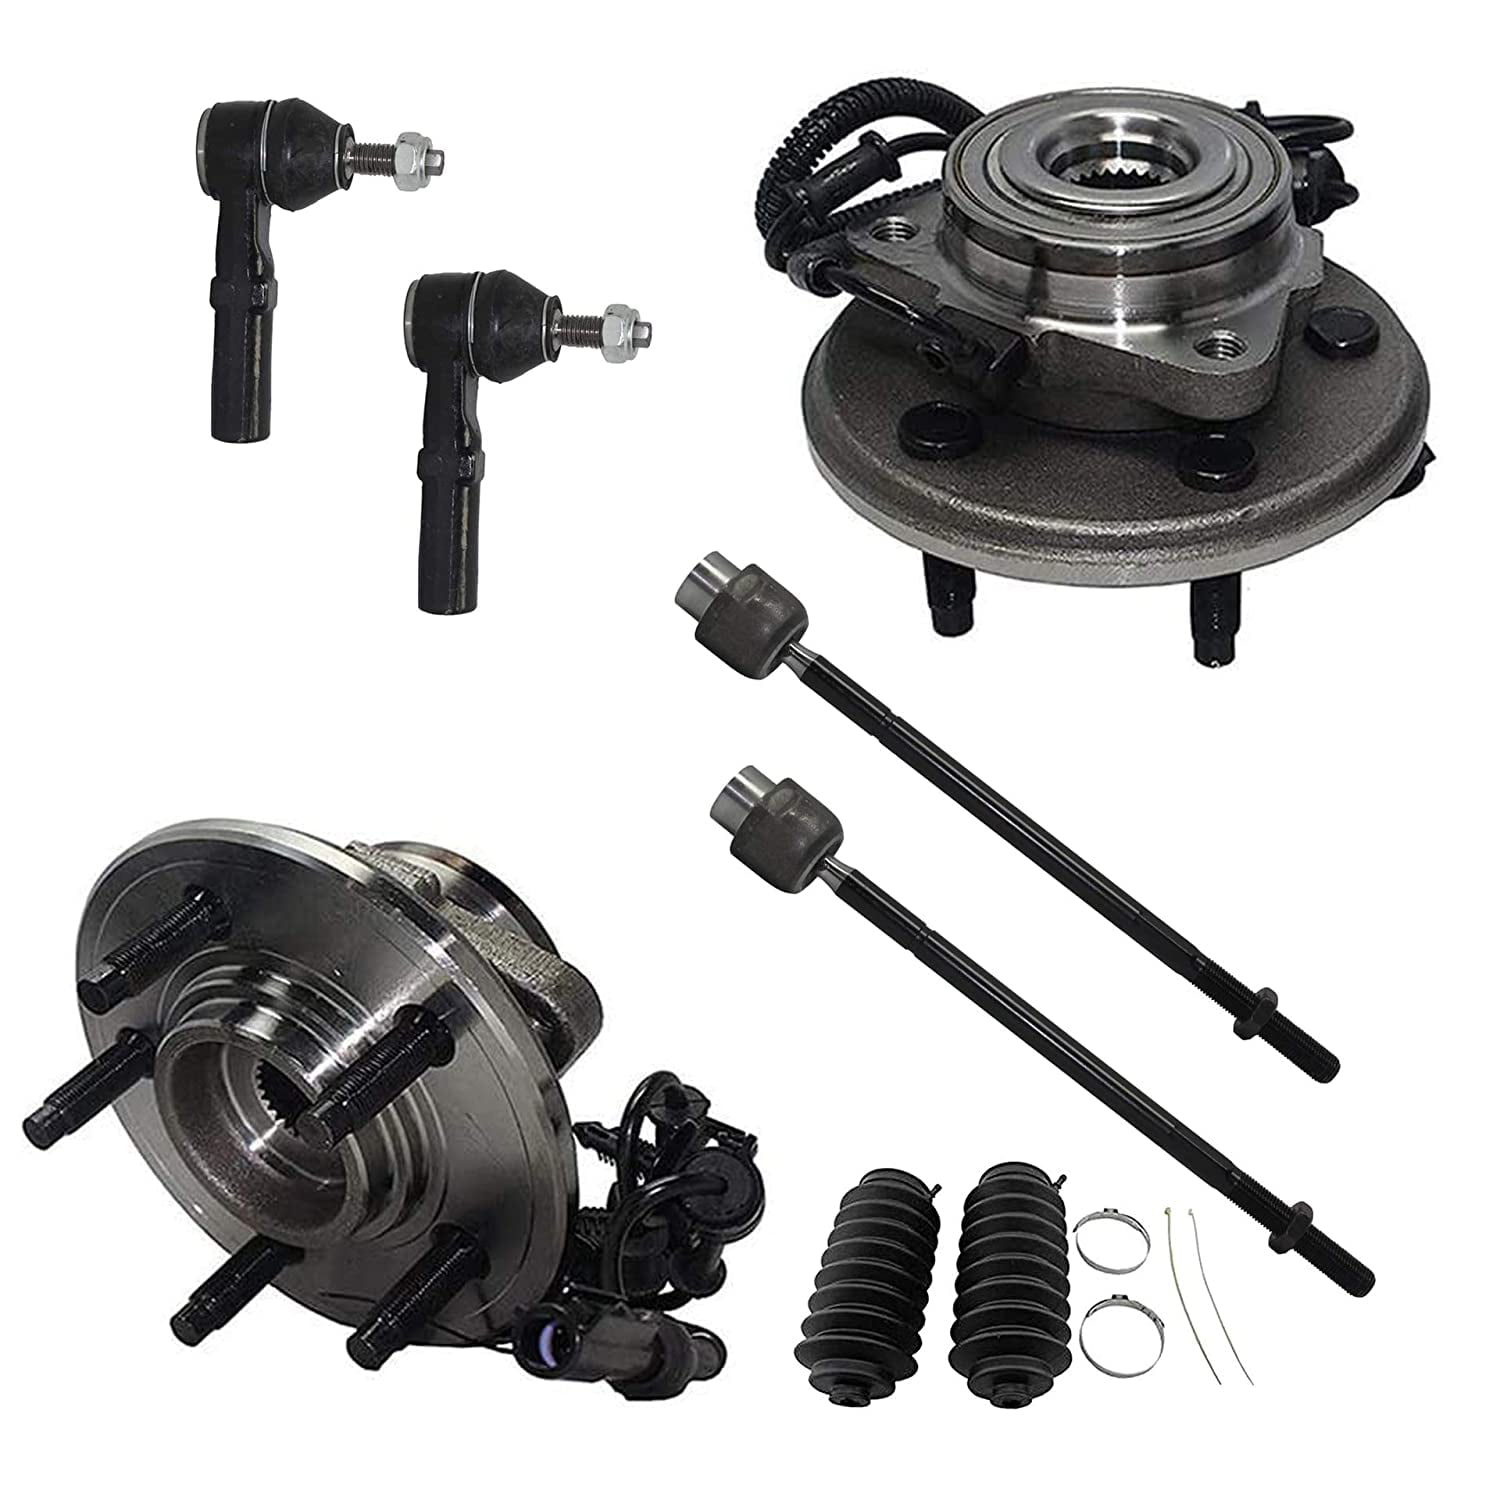 PartsW 2 Pc New Rack & Pinion Bellow Boots Kit for Ford Explorer/Mazda B2300 Mercury Mountaineer 